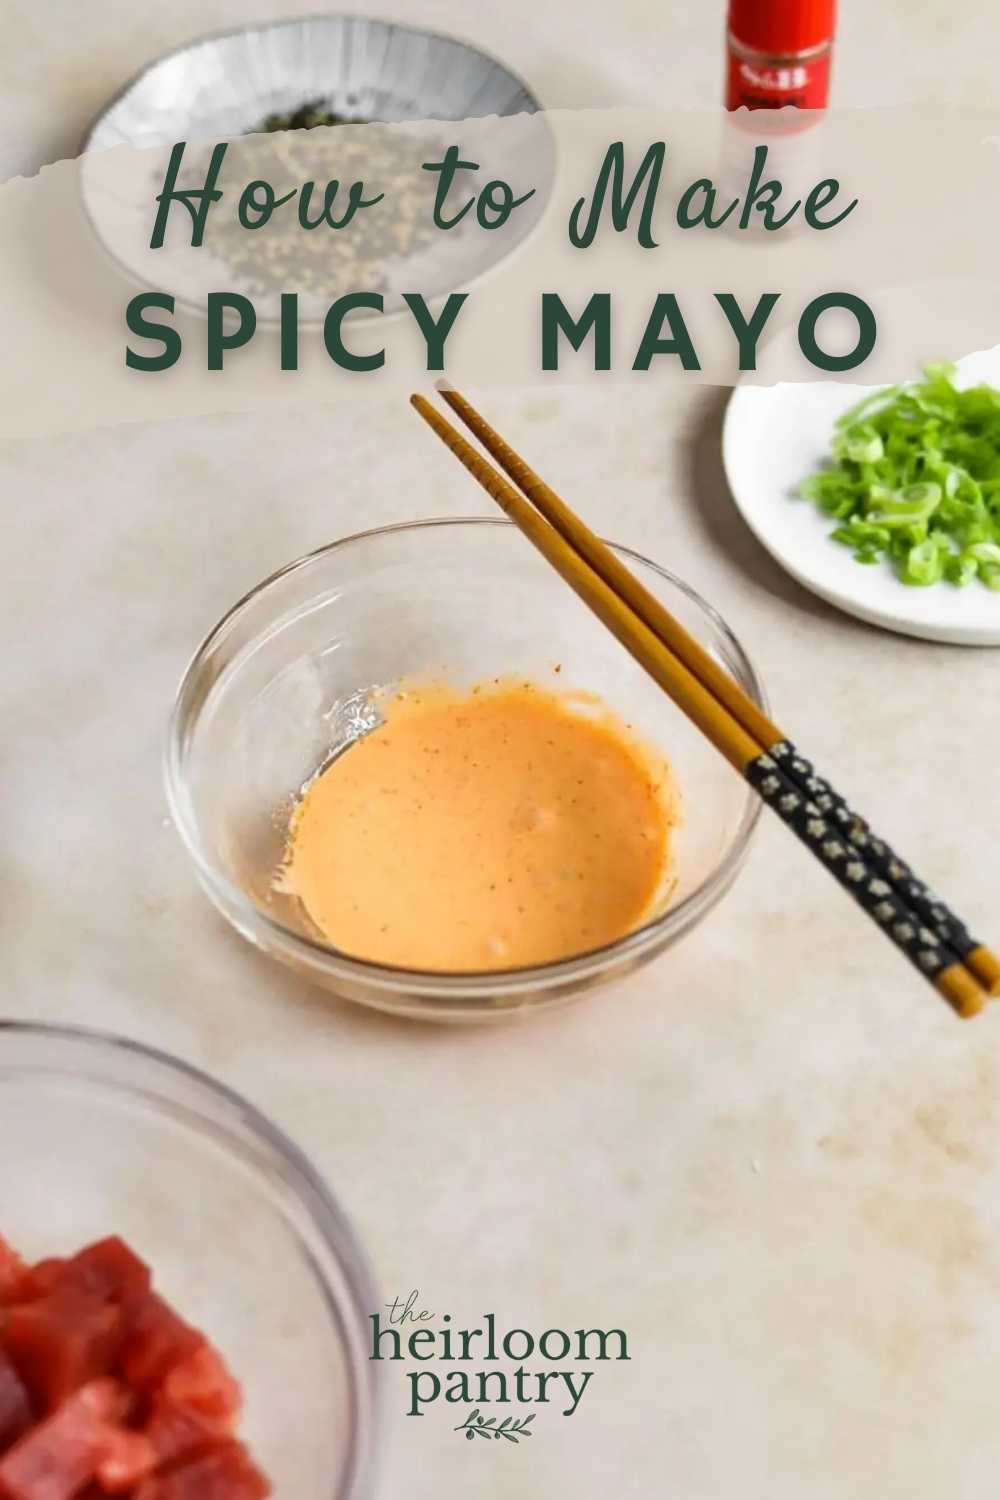 How to Make Spicy Mayo - The Heirloom Pantry Pinterest